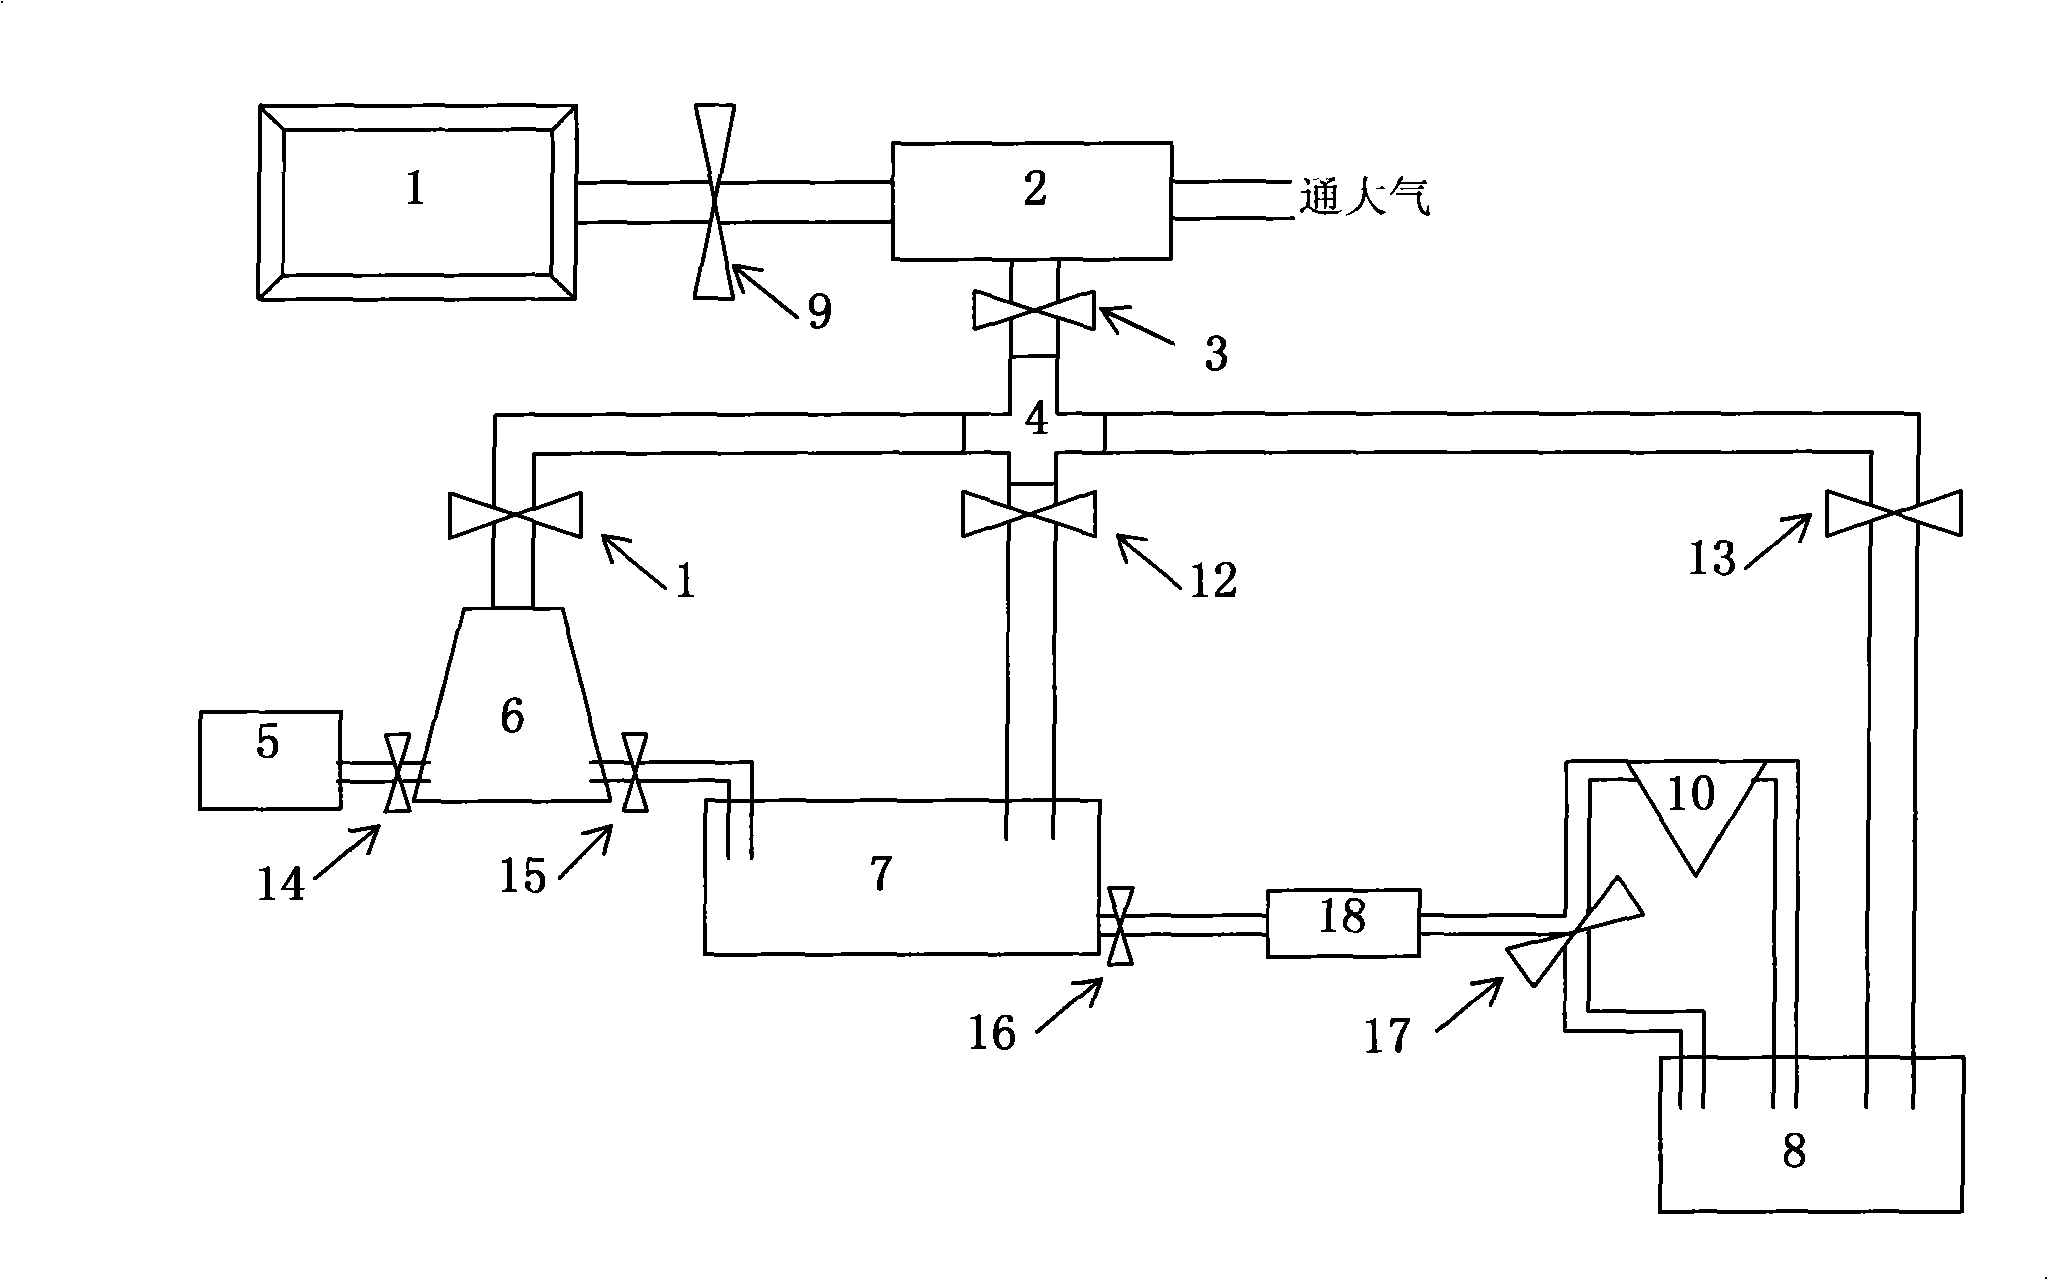 Integrated device for abstracting, collecting, transporting and measuring trace tissue fluid